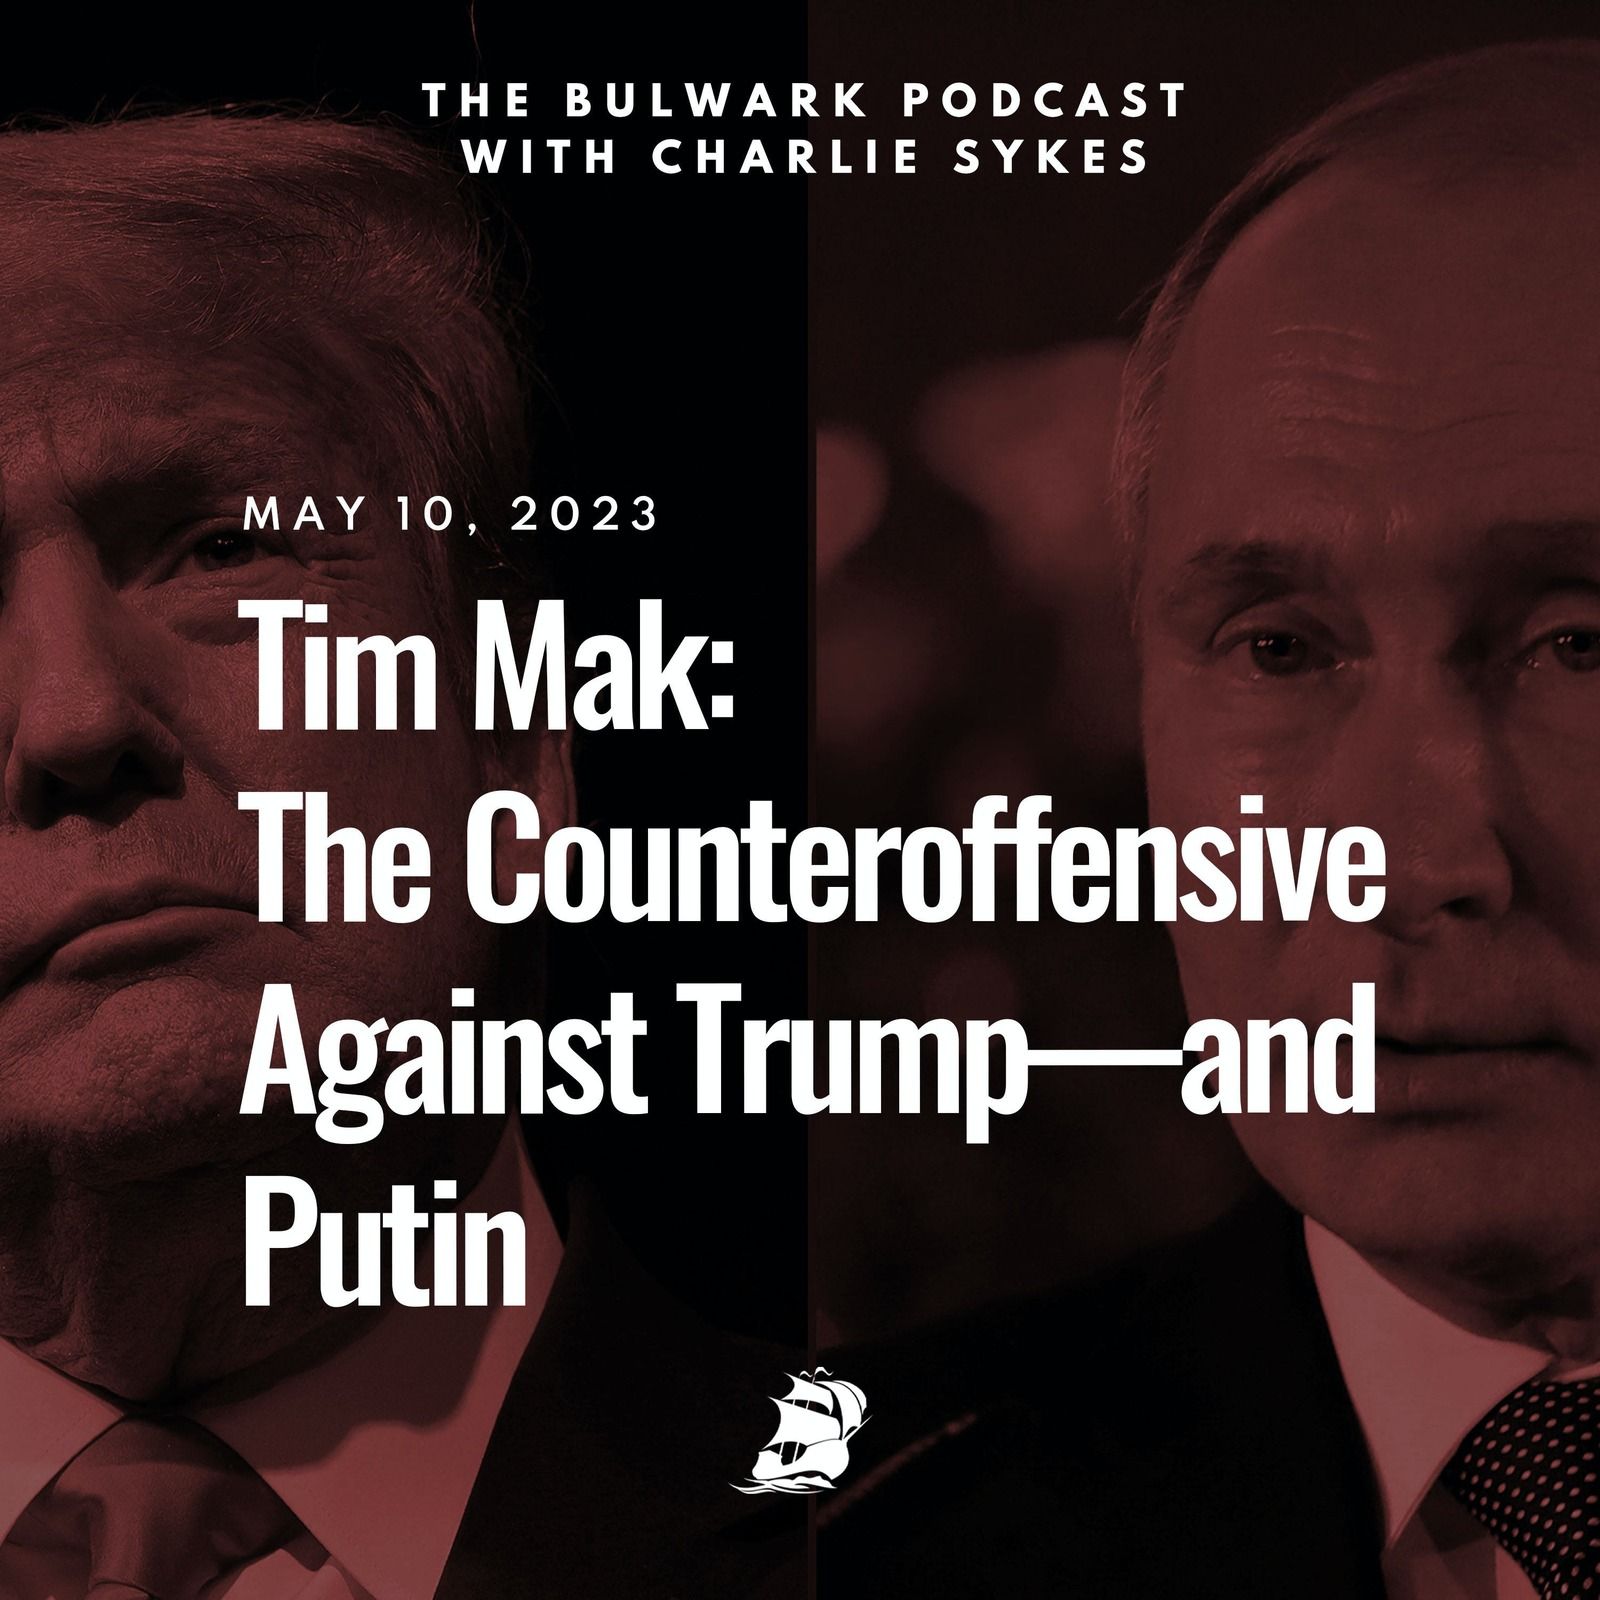 The Counteroffensive Against Trump—and Putin by The Bulwark Podcast